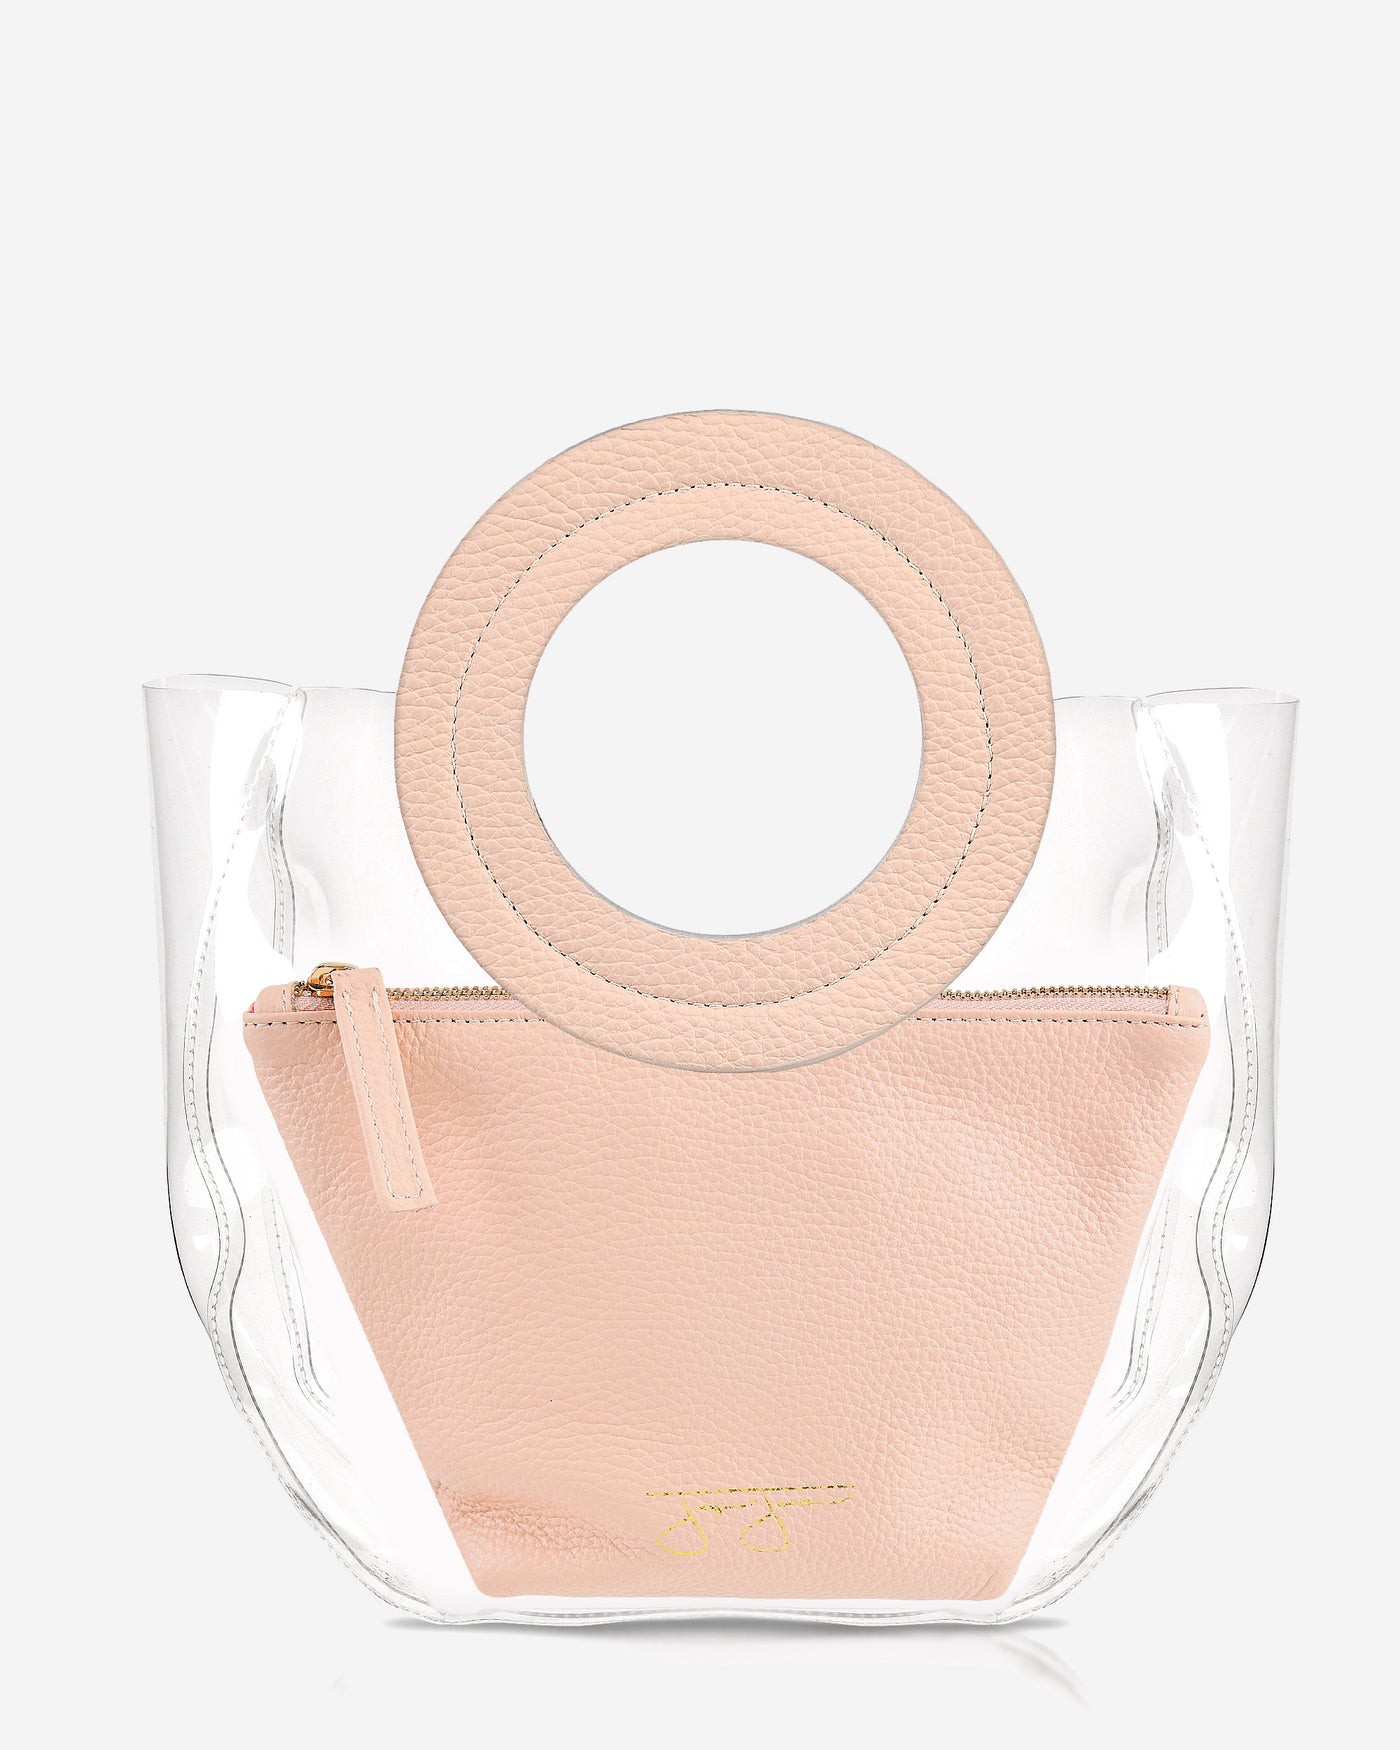 Lacey Bag - Blush Lacey Clear Bag Joey James, The Label   